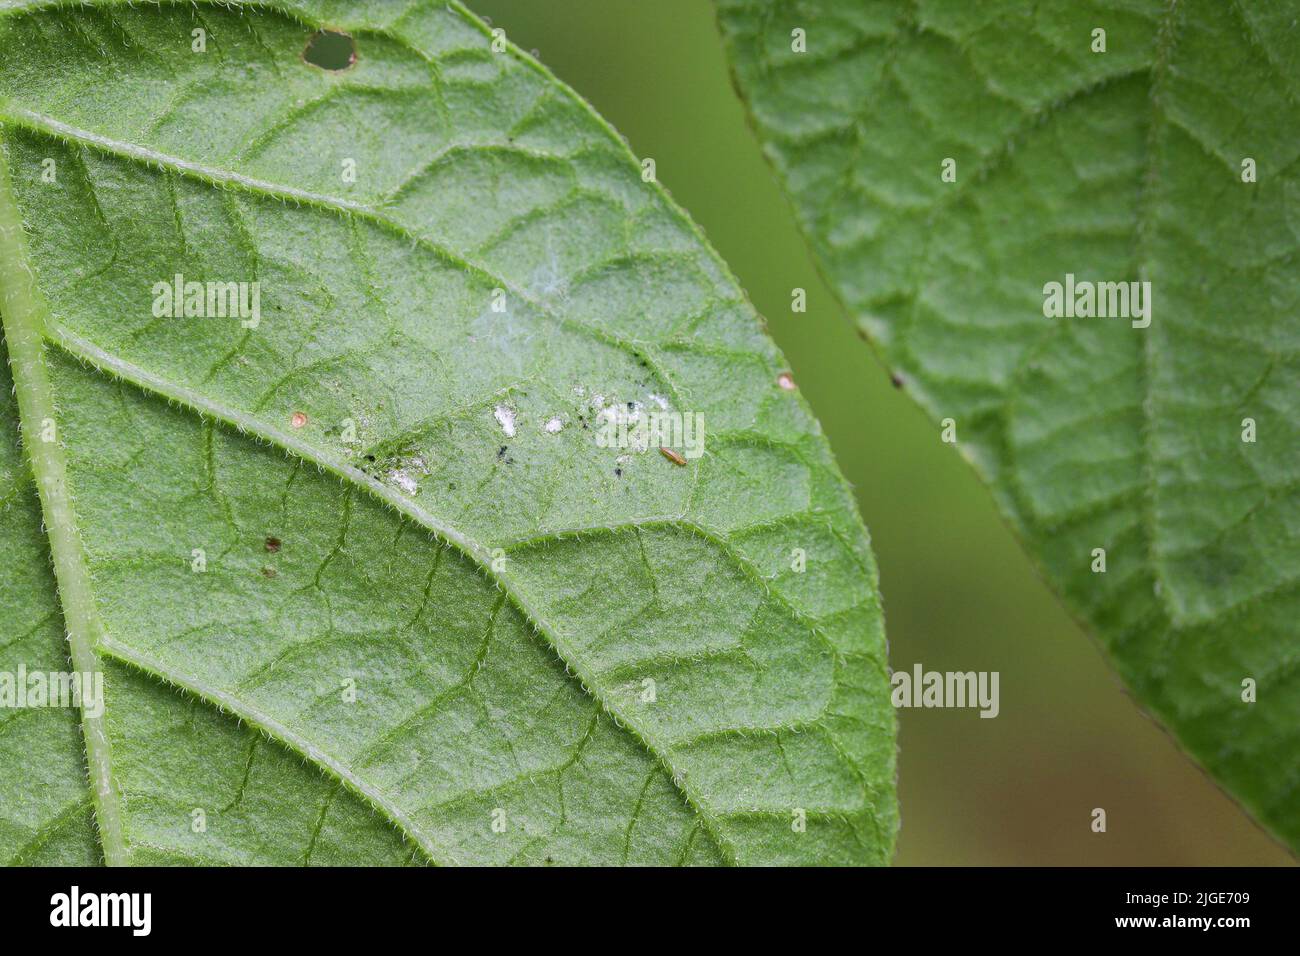 Thrips and under a damaged potato leaf. Stock Photo